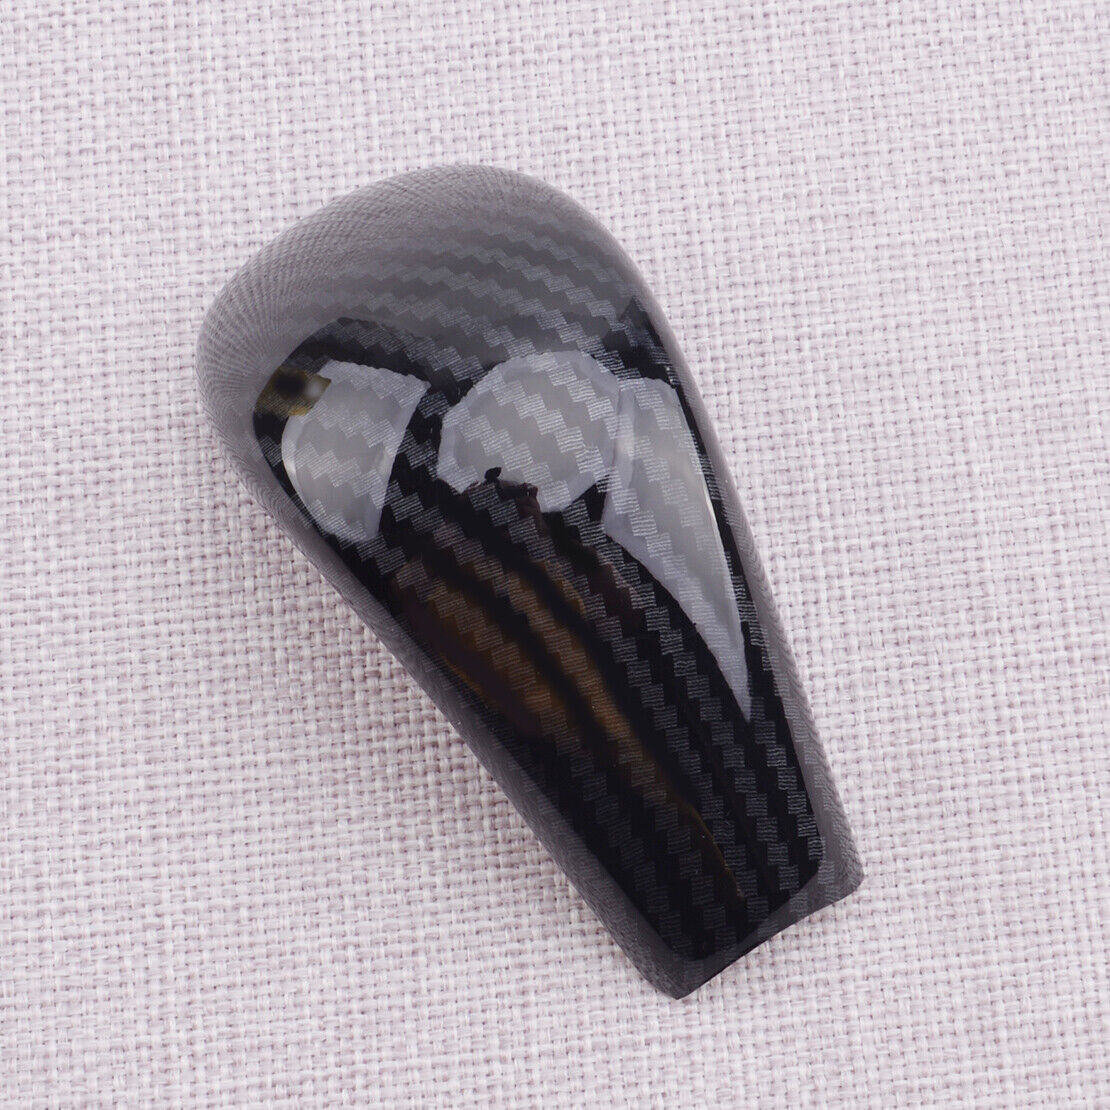 Gear Shift Lever Knob Shifter Cover Trim fit for Nissan X-Trail Rogue fr 14-18